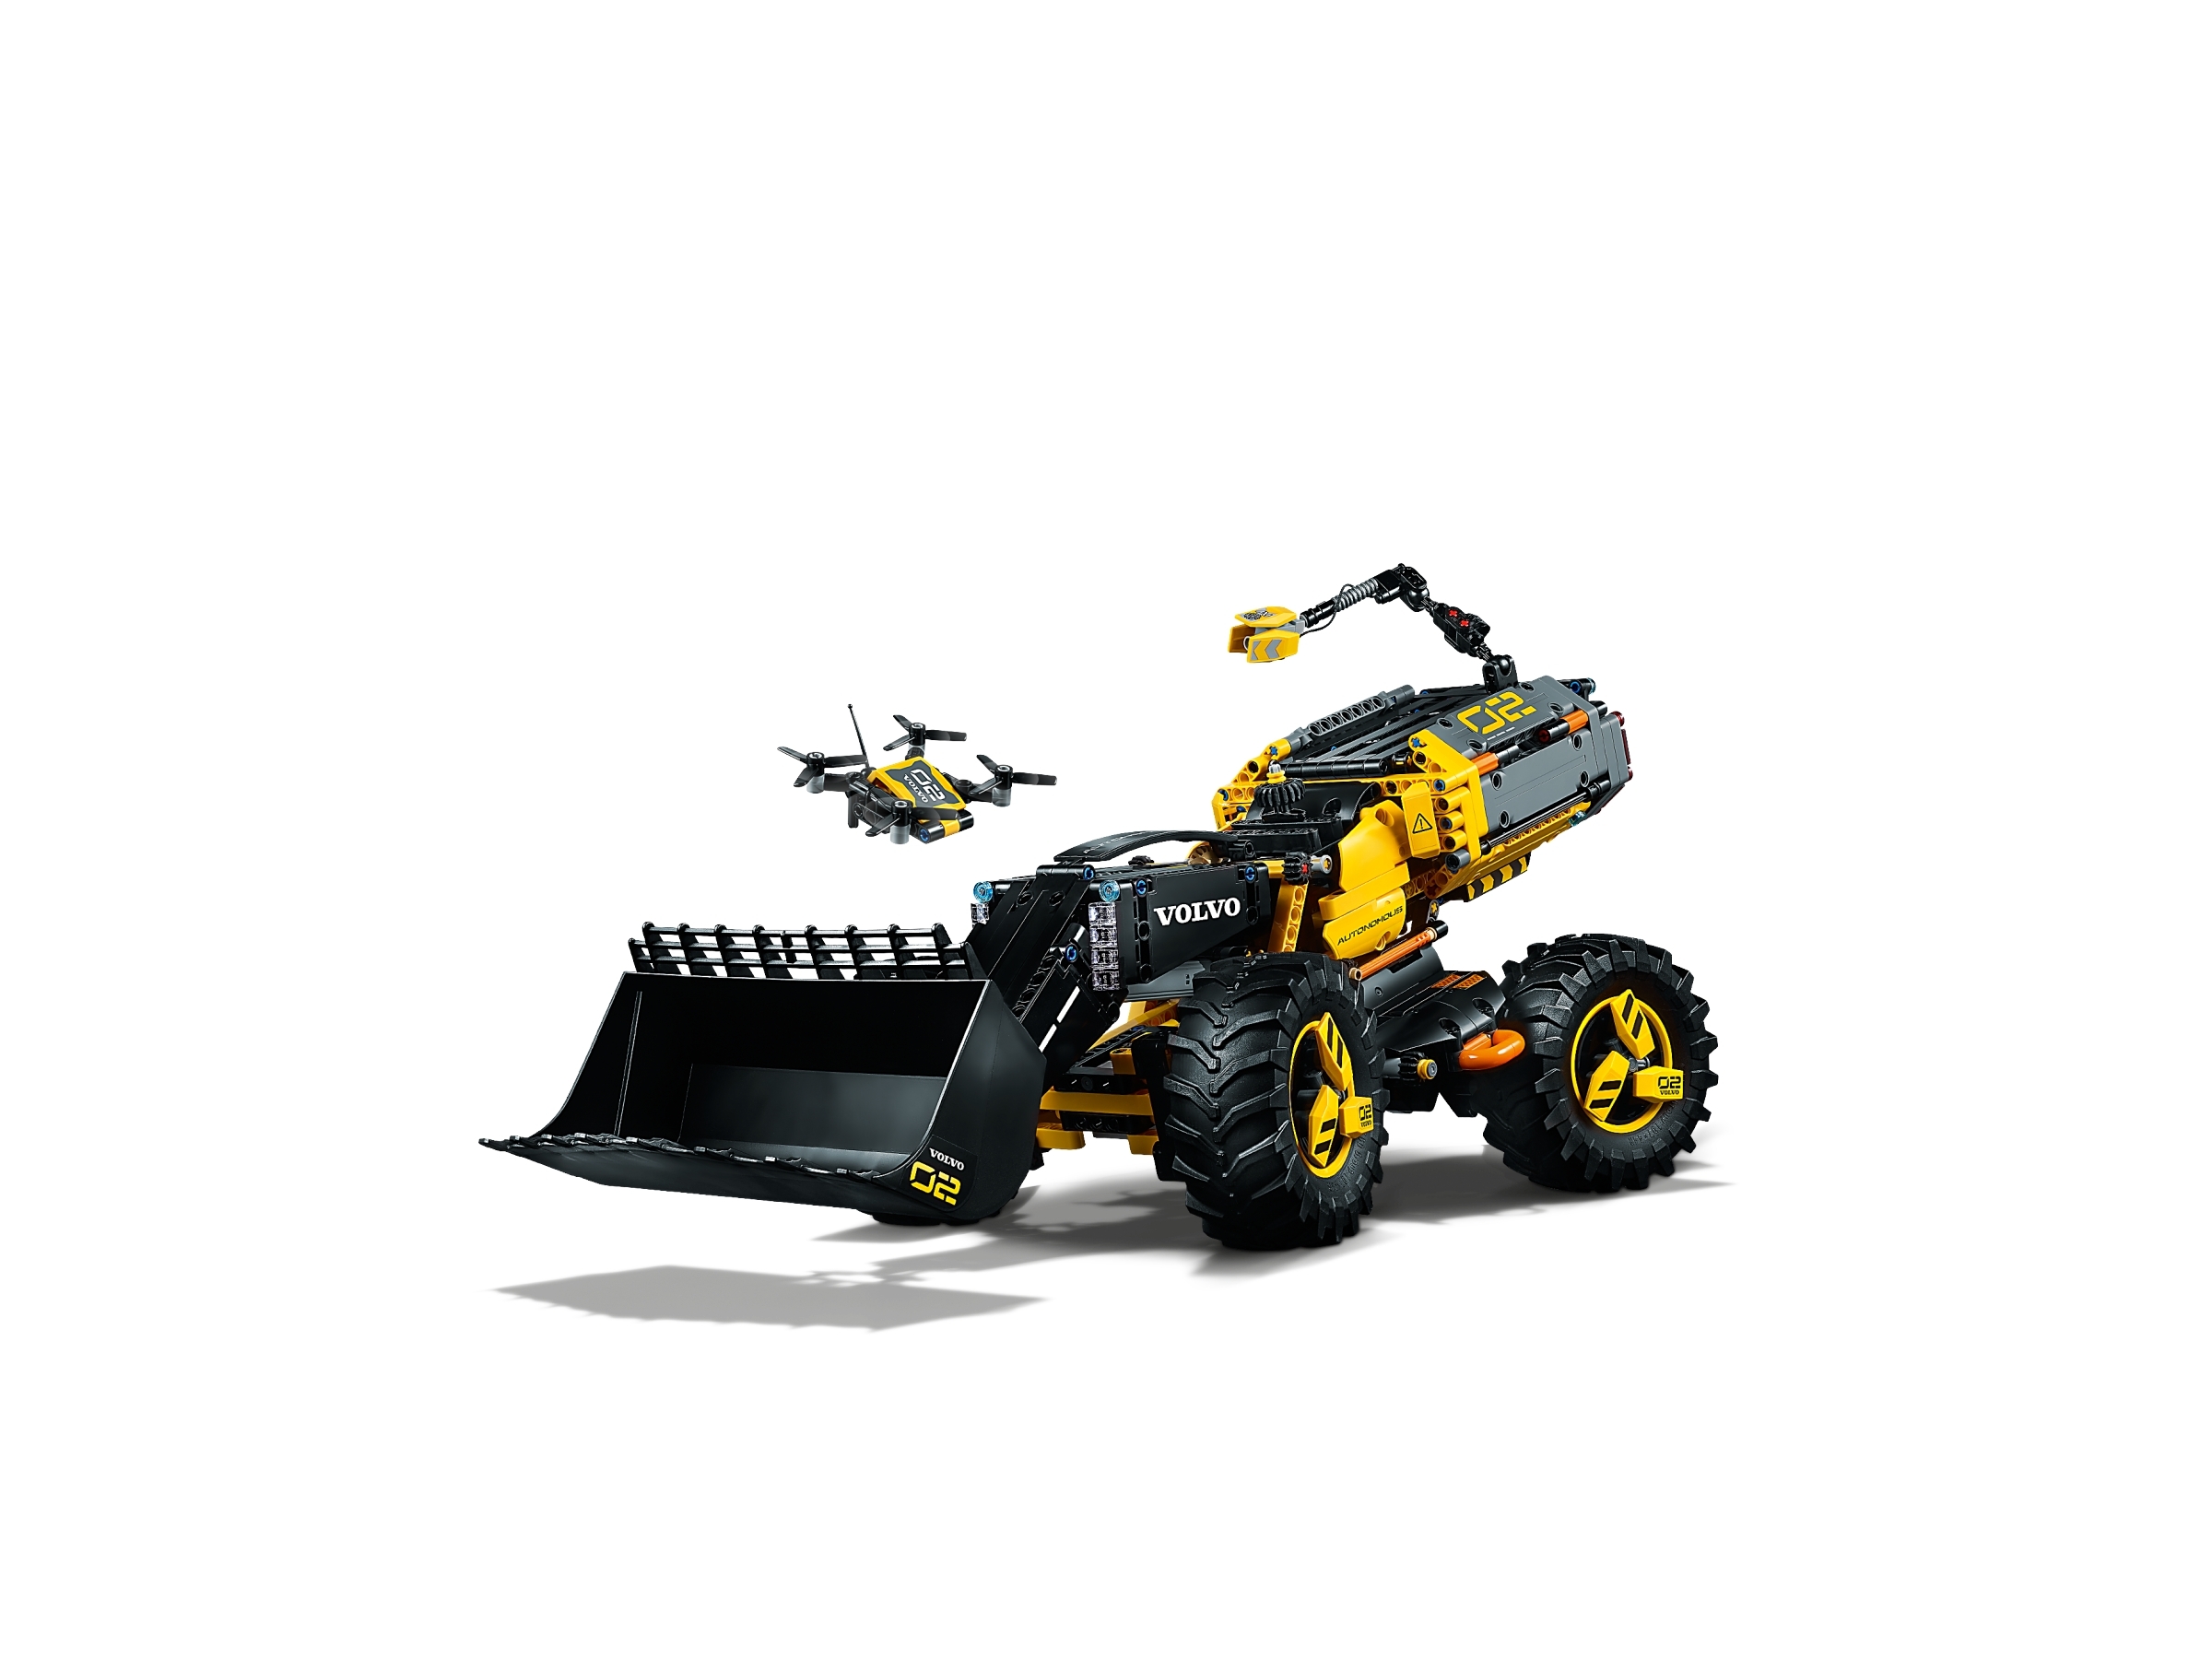 Volvo Concept Wheel Loader ZEUX 42081 | Technic™ | Buy online at the Official Shop US